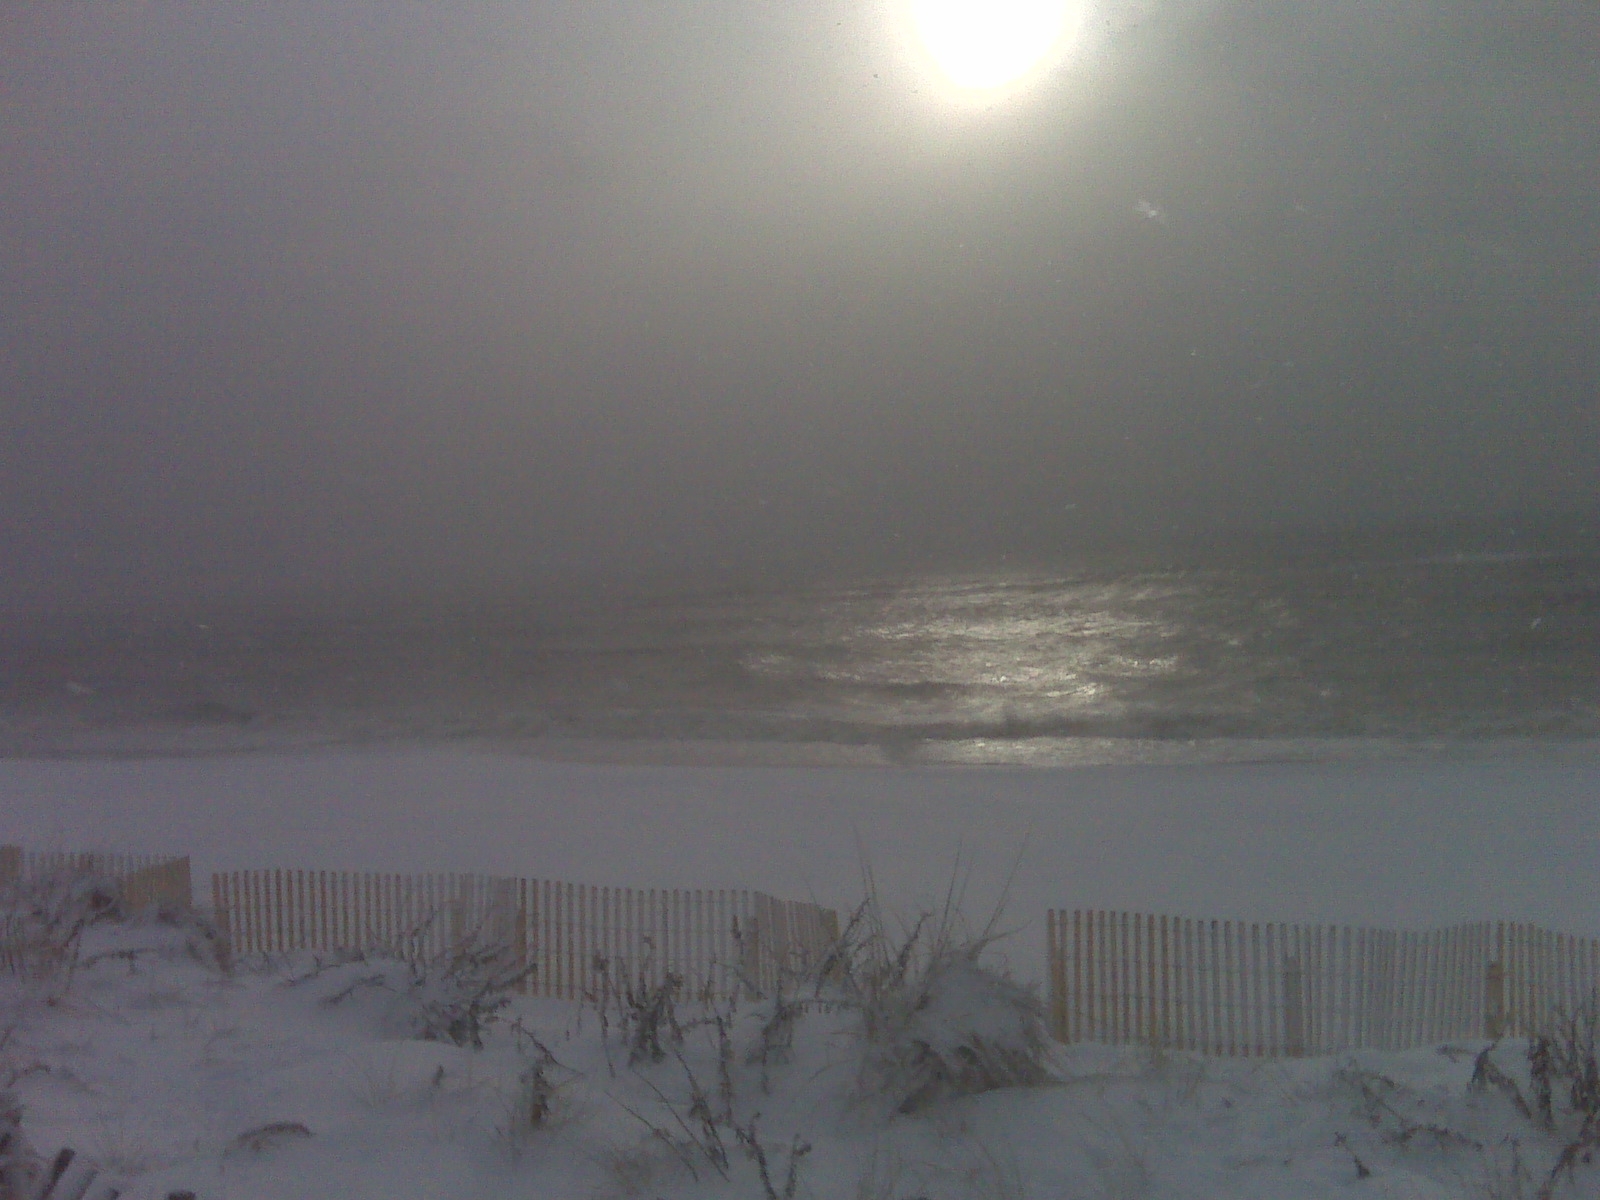 from-cory-in-quogue.jpg 